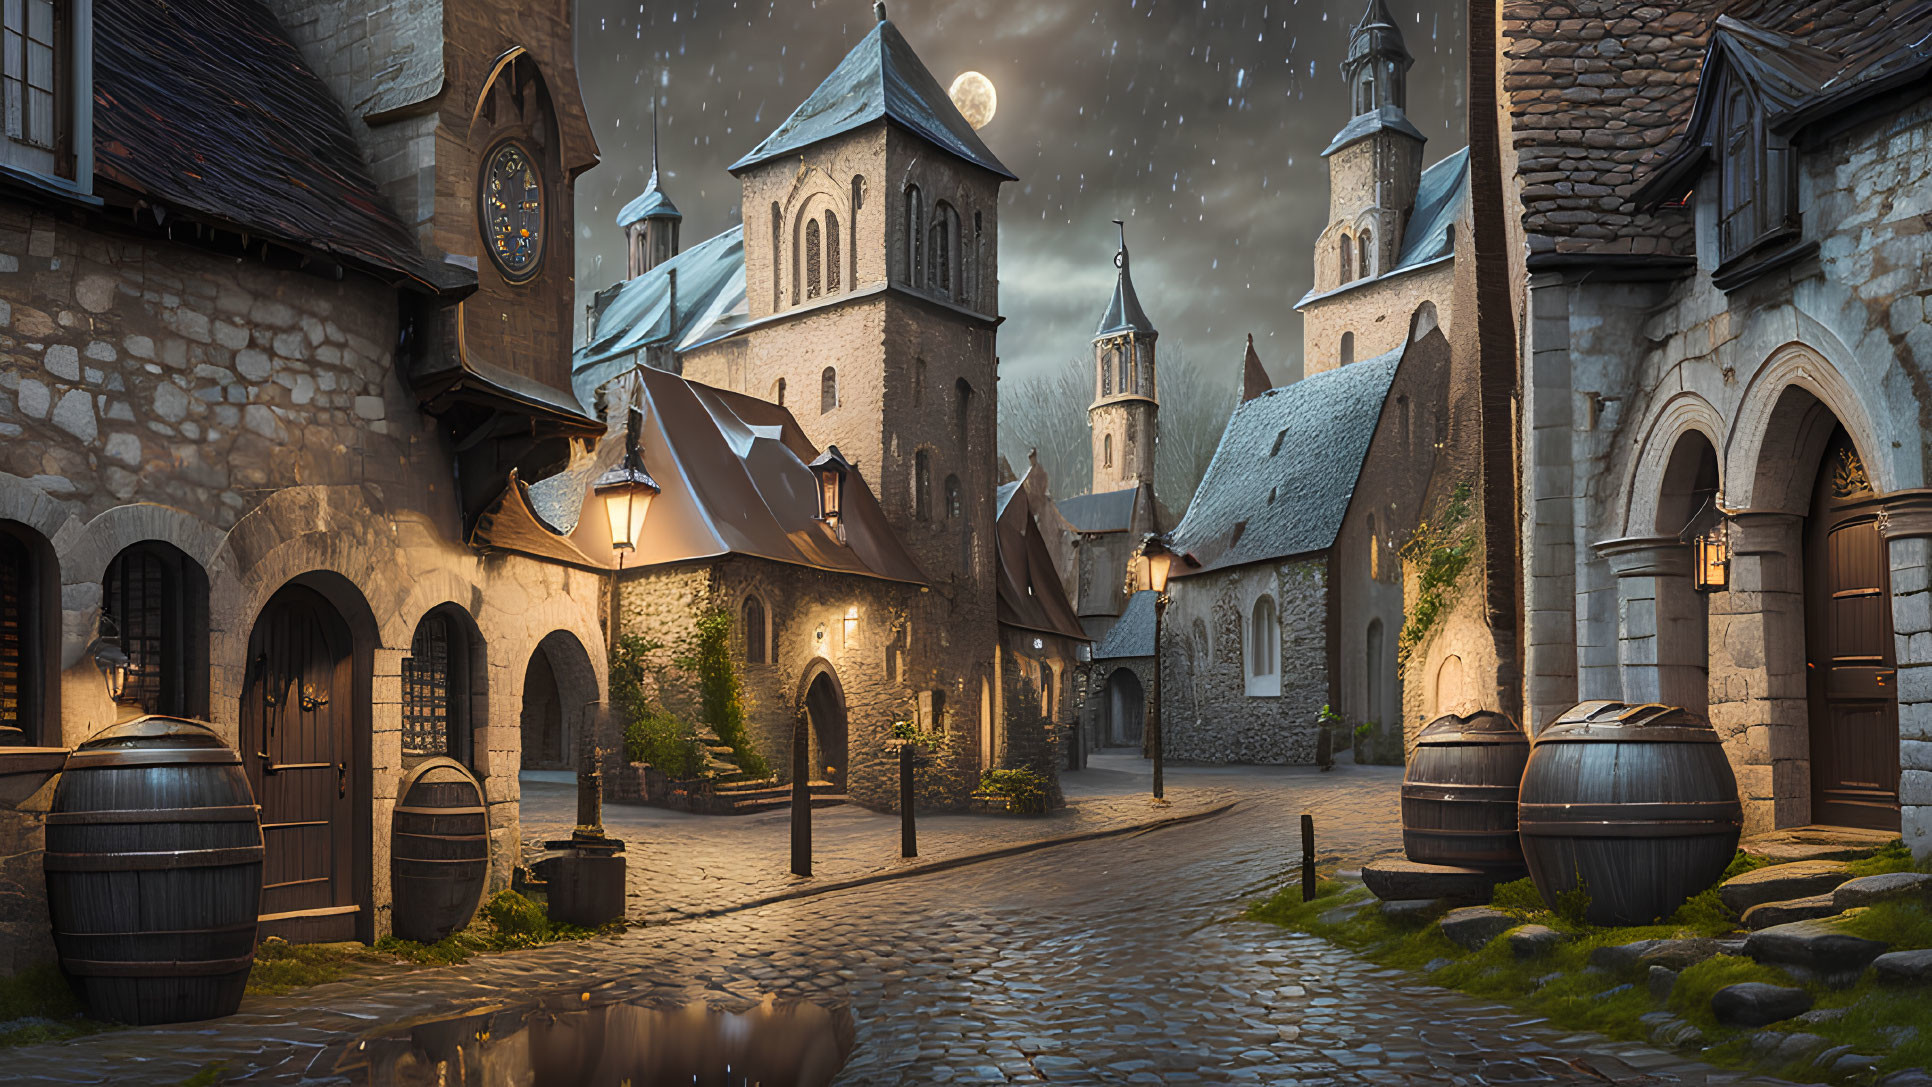 Medieval village night scene with cobblestone streets, lanterns, and full moon.